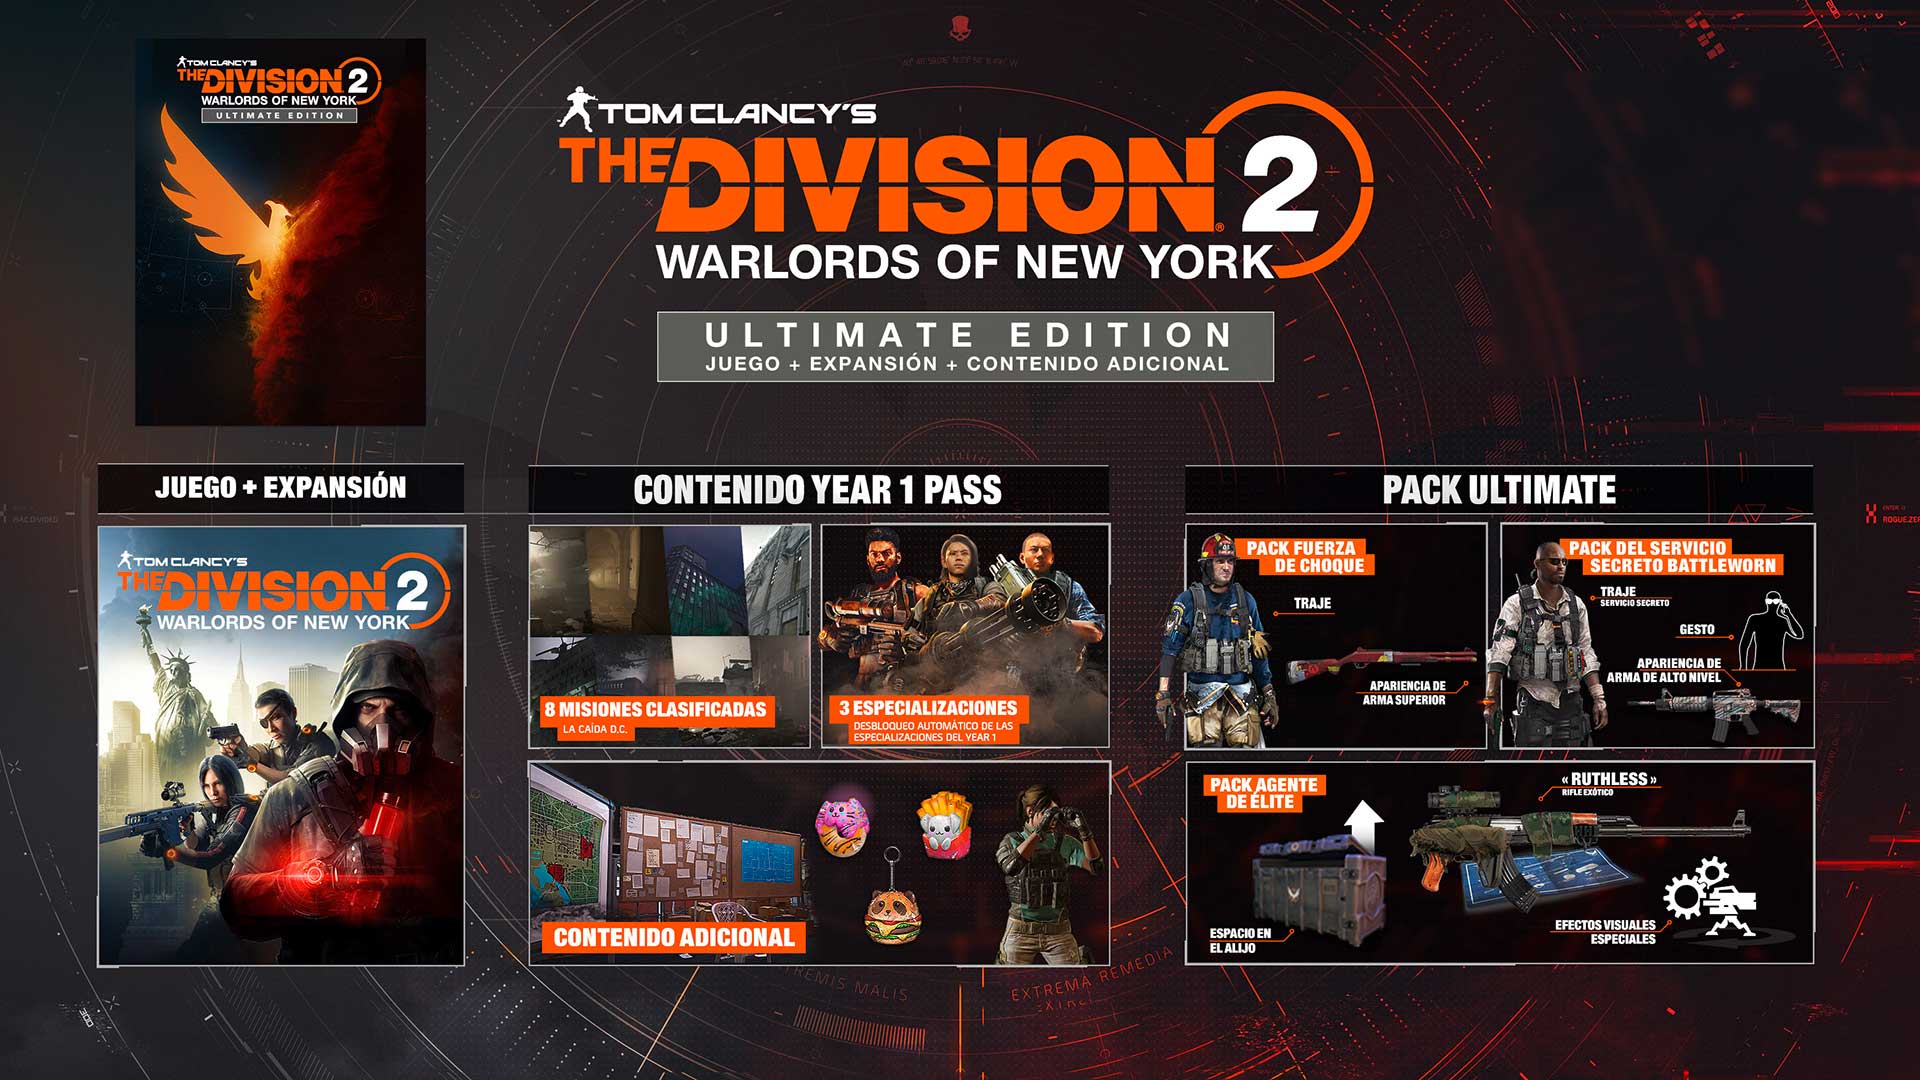 The Division 2 Warlords of New York Ultimate